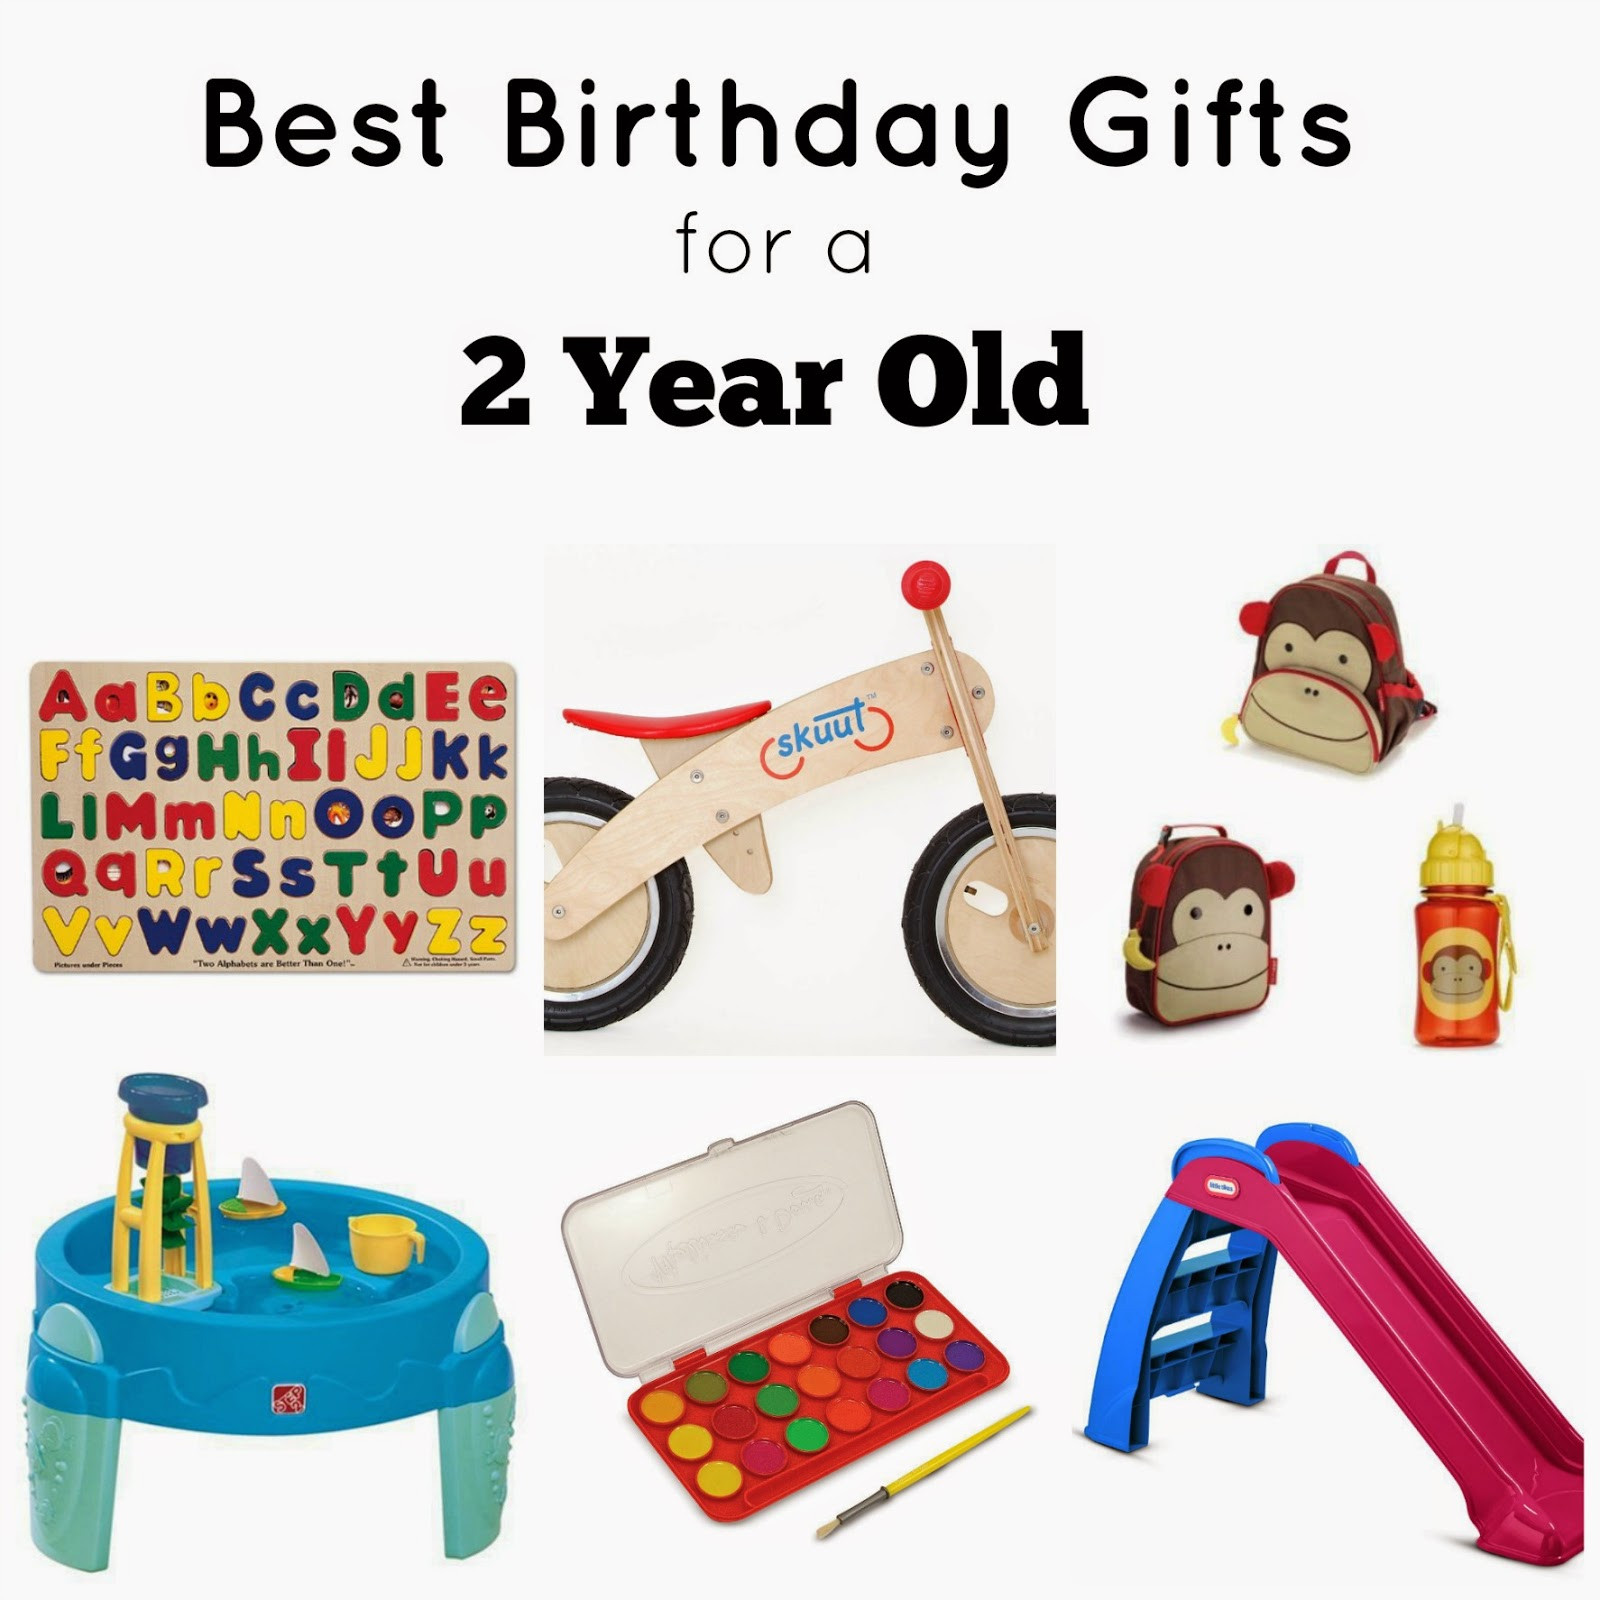 Birthday Gift For 2 Year Old
 Our Life on a Bud Best Birthday Gifts for a 2 Year Old